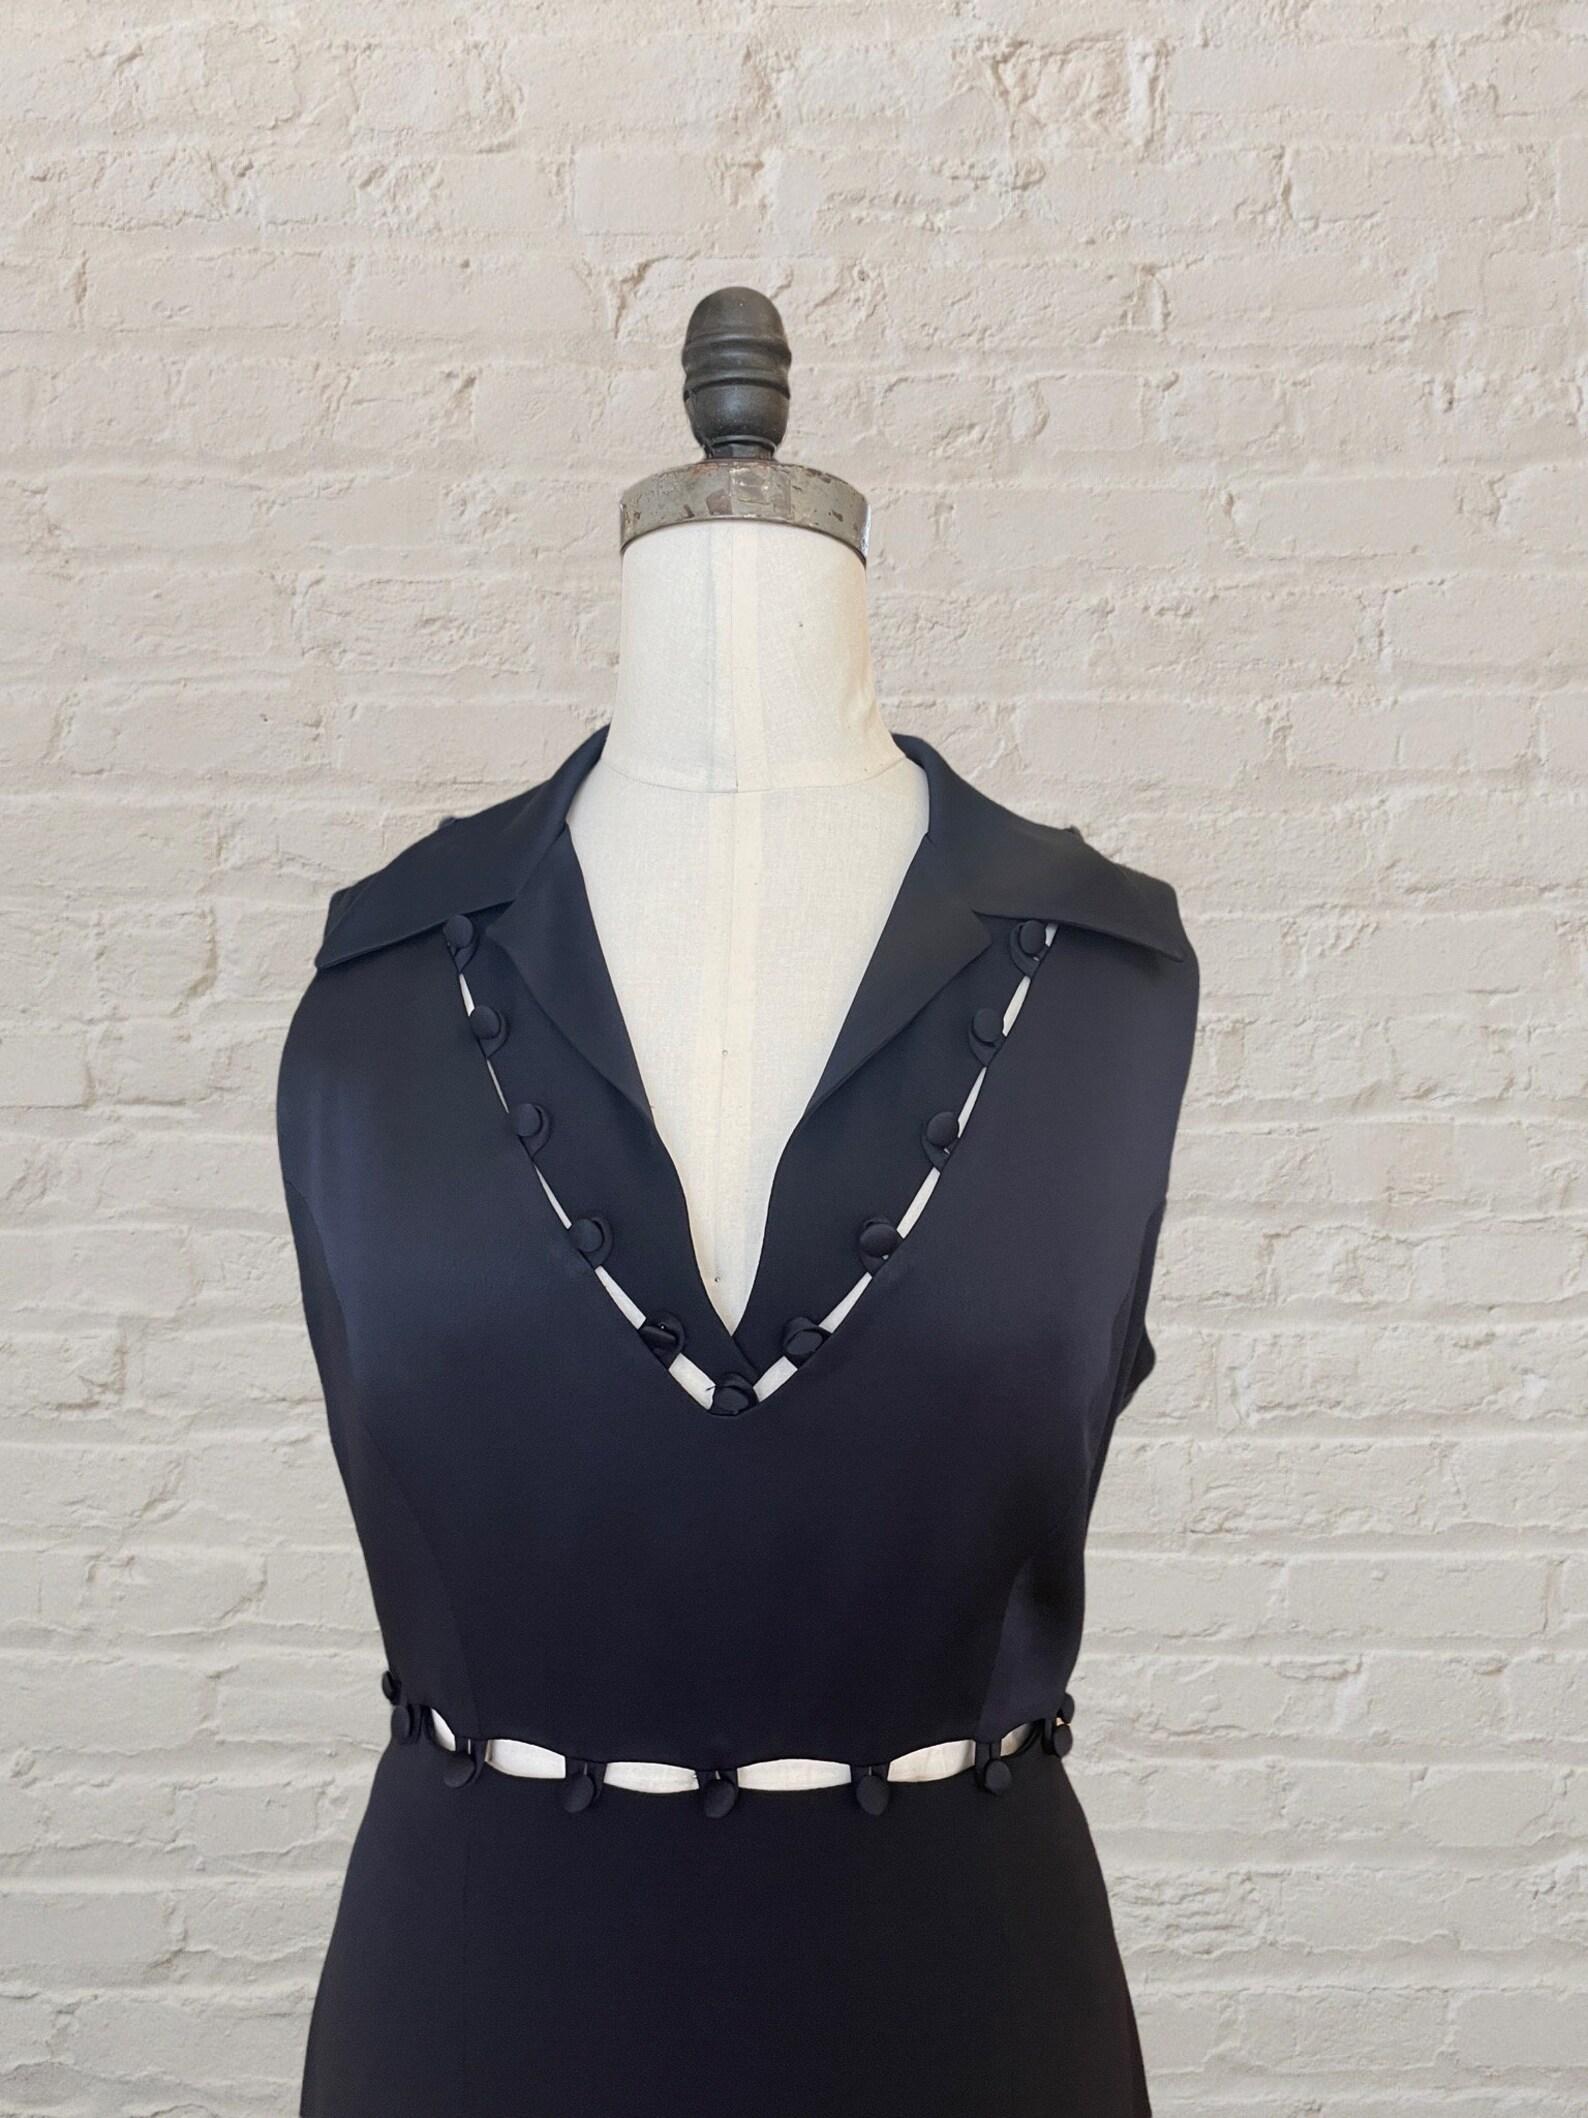 Moschino Cheap and Chic Midnight Blue Puzzle Dress In Excellent Condition For Sale In Brooklyn, NY